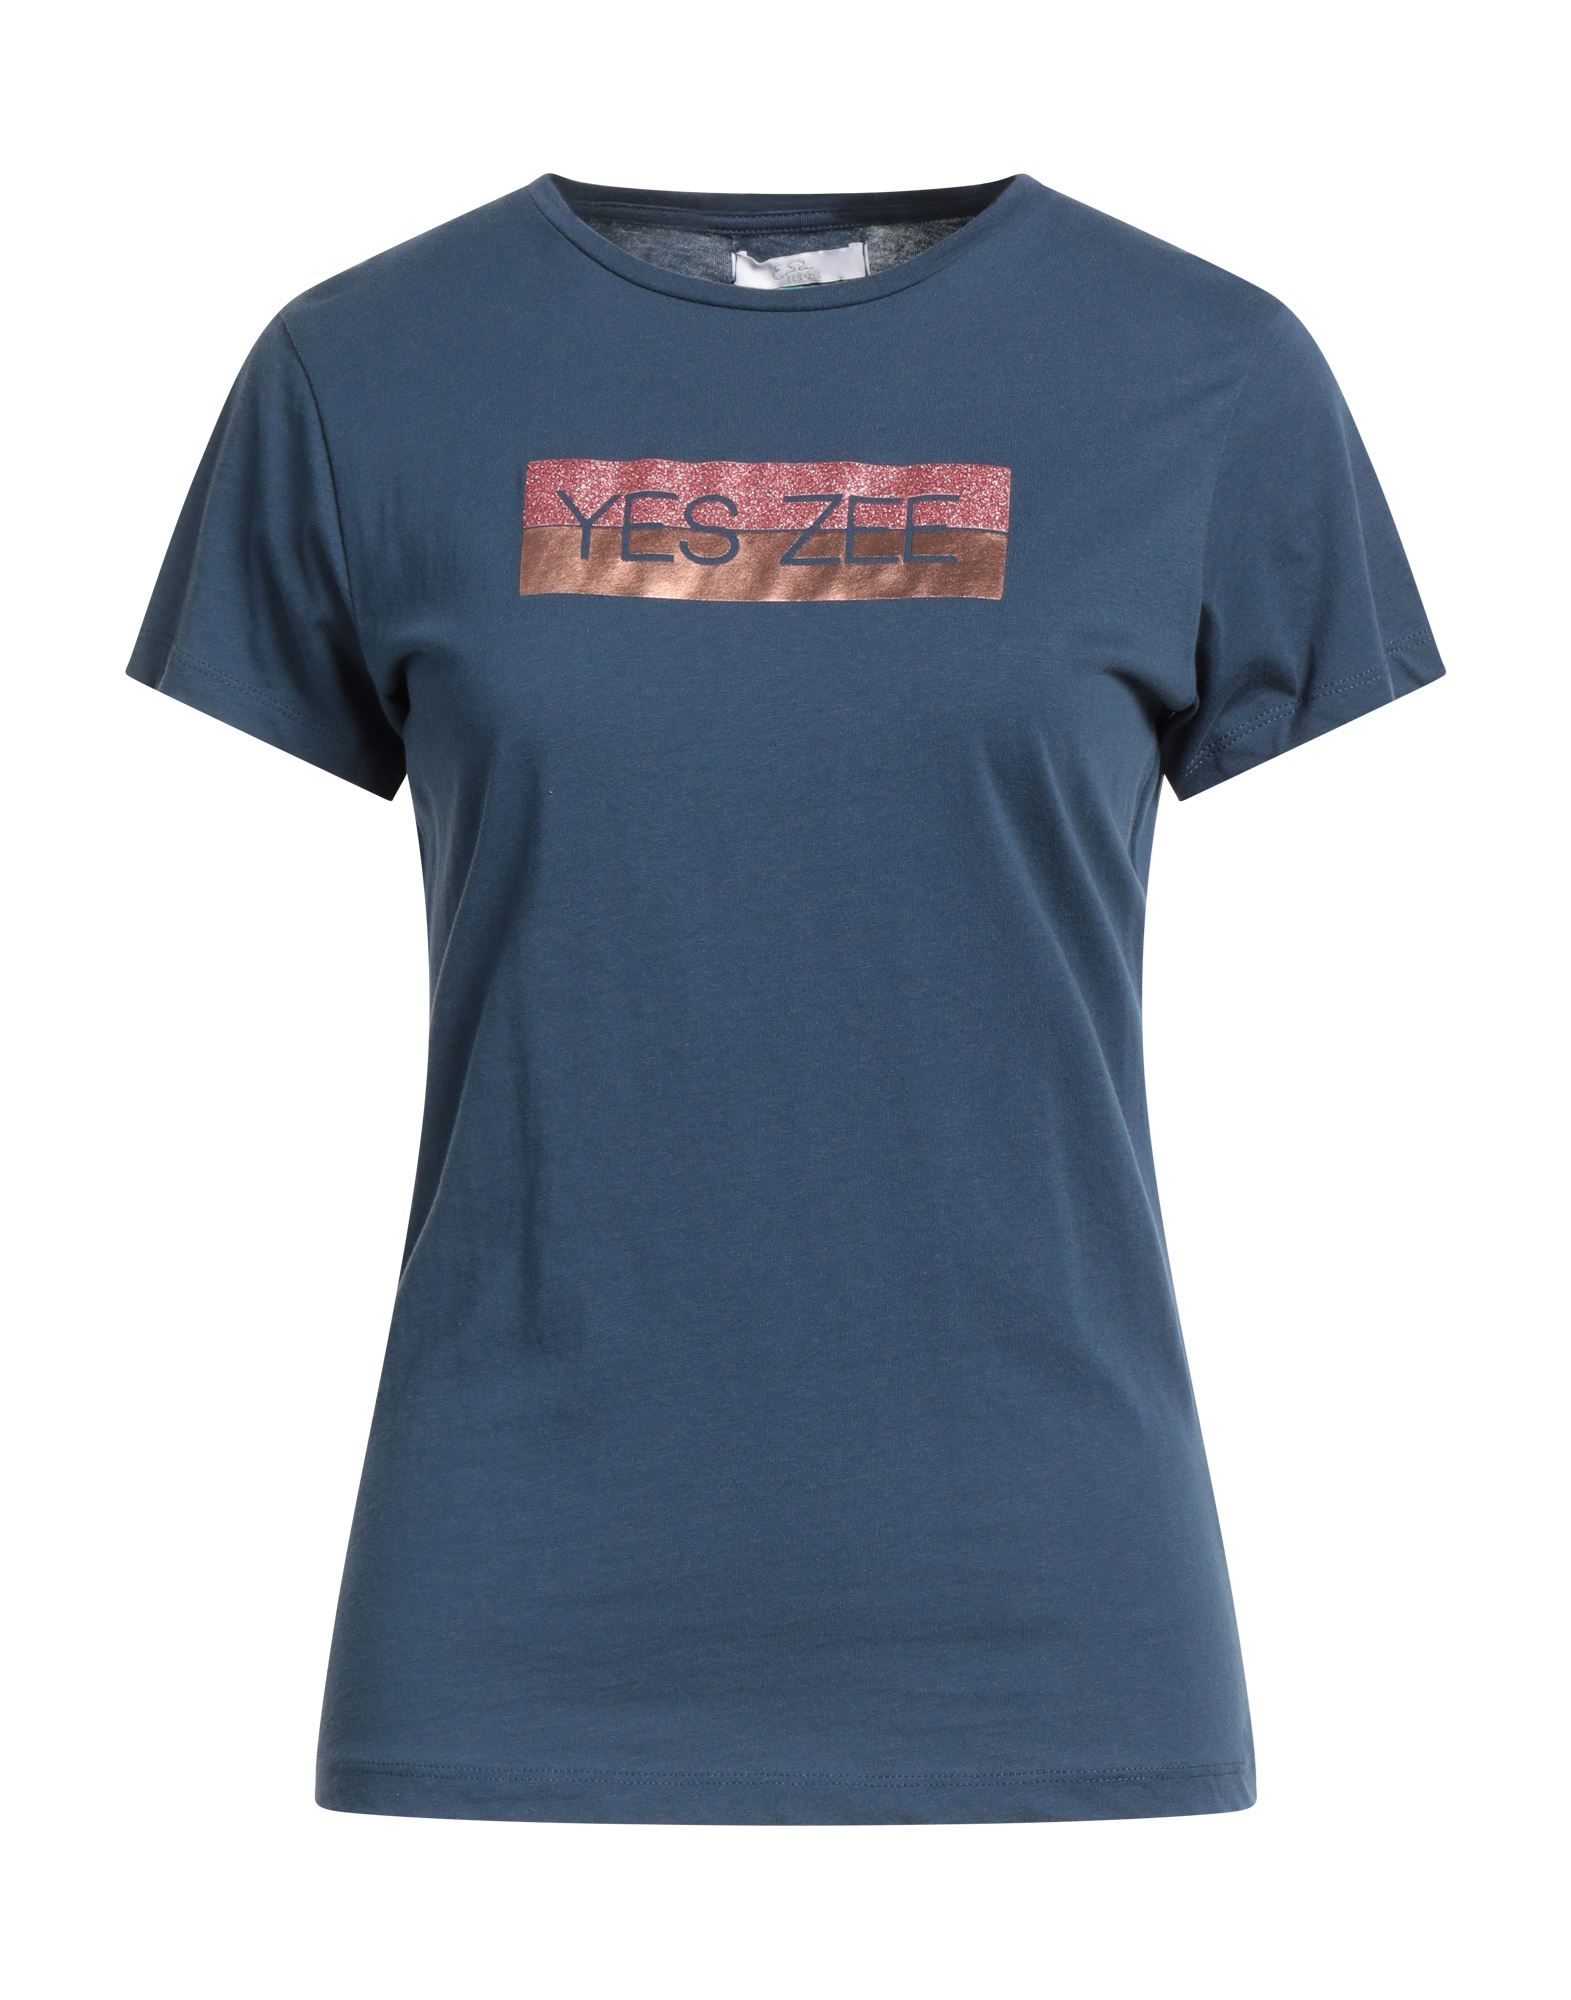 Yes Zee By Essenza T-shirts In Navy Blue